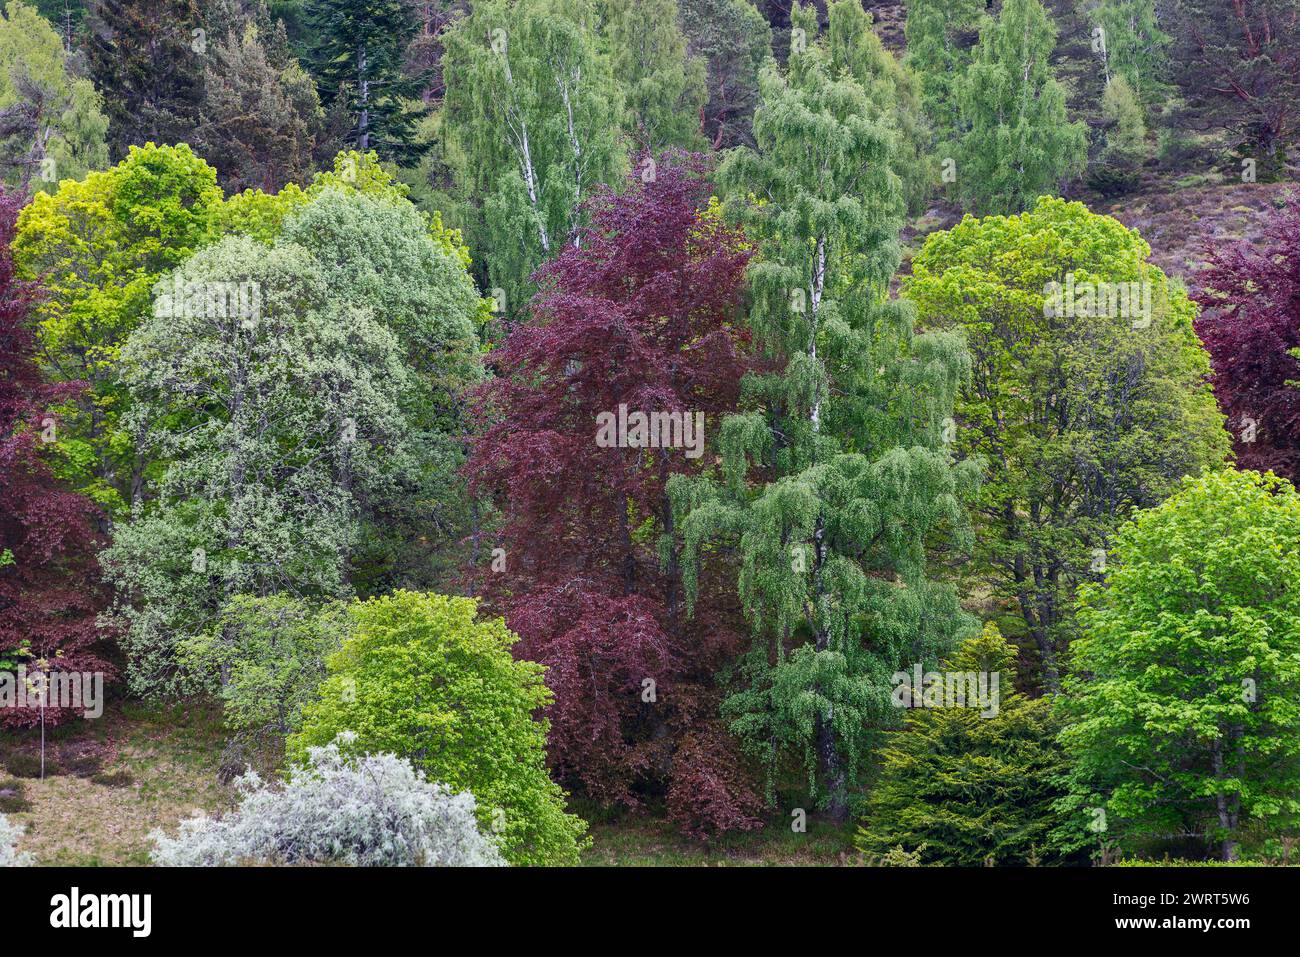 A rich tapestry of deciduous and evergreen trees in a temperate woodland, showcasing an array of colors from lush greens to deep burgundies Stock Photo